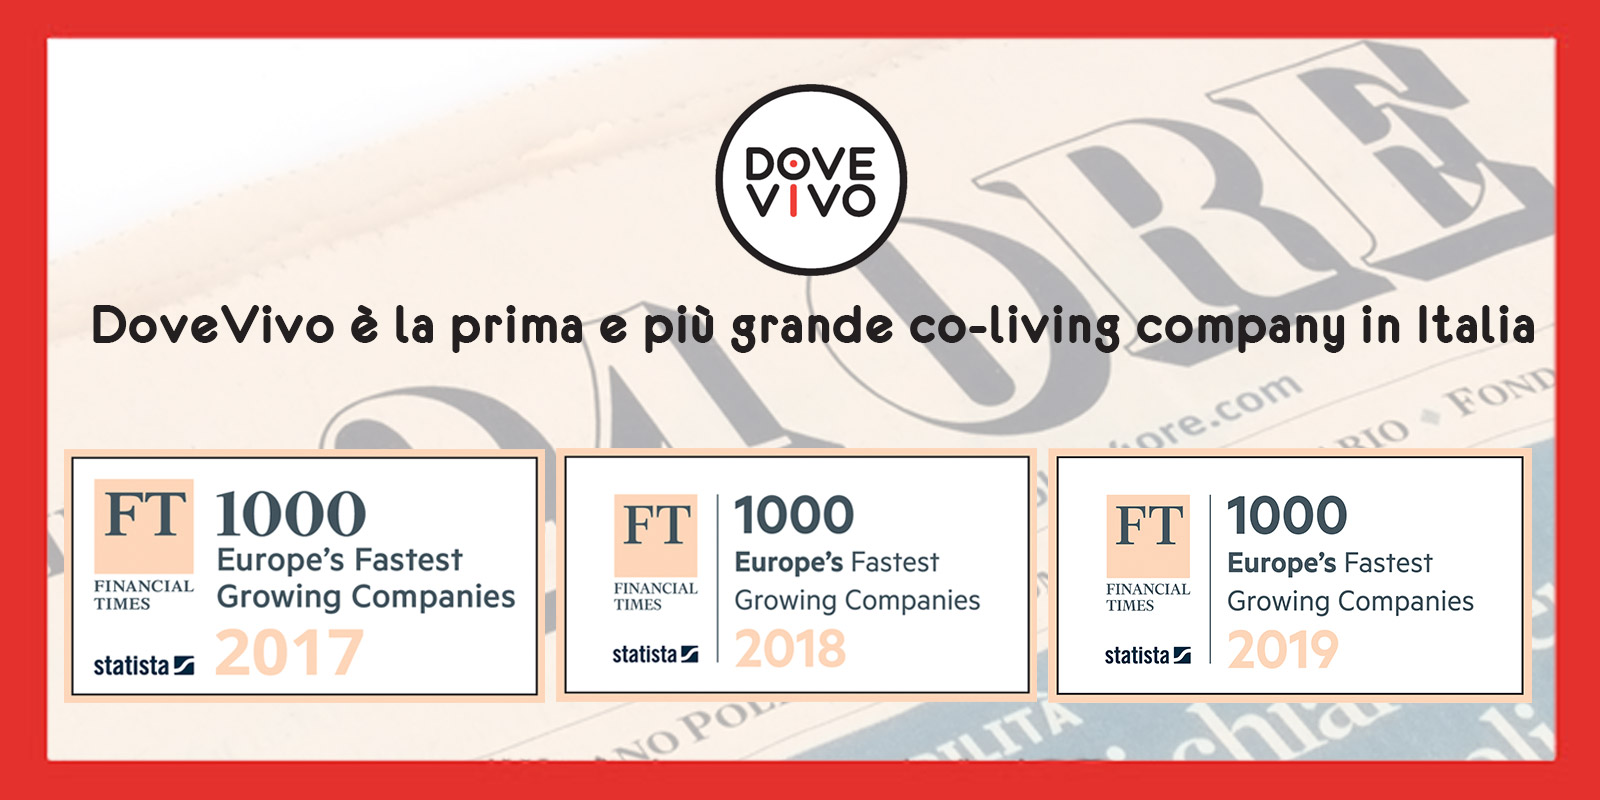 DoveVivo in the FT1000 league table for the third year...